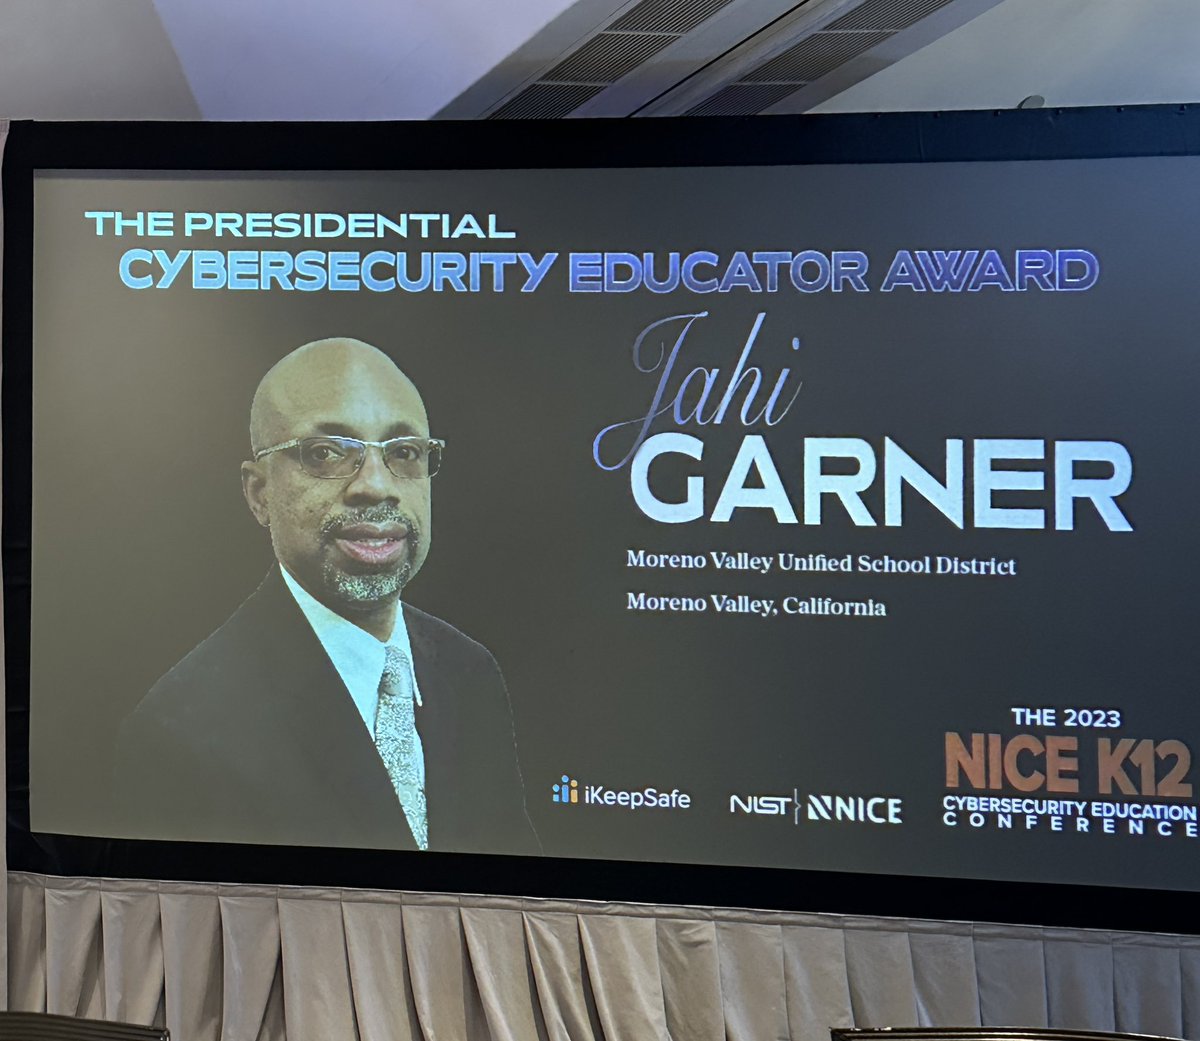 NEW!- Presidential Cybersecurity Educator Awards go to - Jahi Gardner from Moreno Valley, CA and Beth Cerrone from St. Vrain Valley in Longmont, CO. Here with Albert Palacios of The White House Office of the National Cyber Director